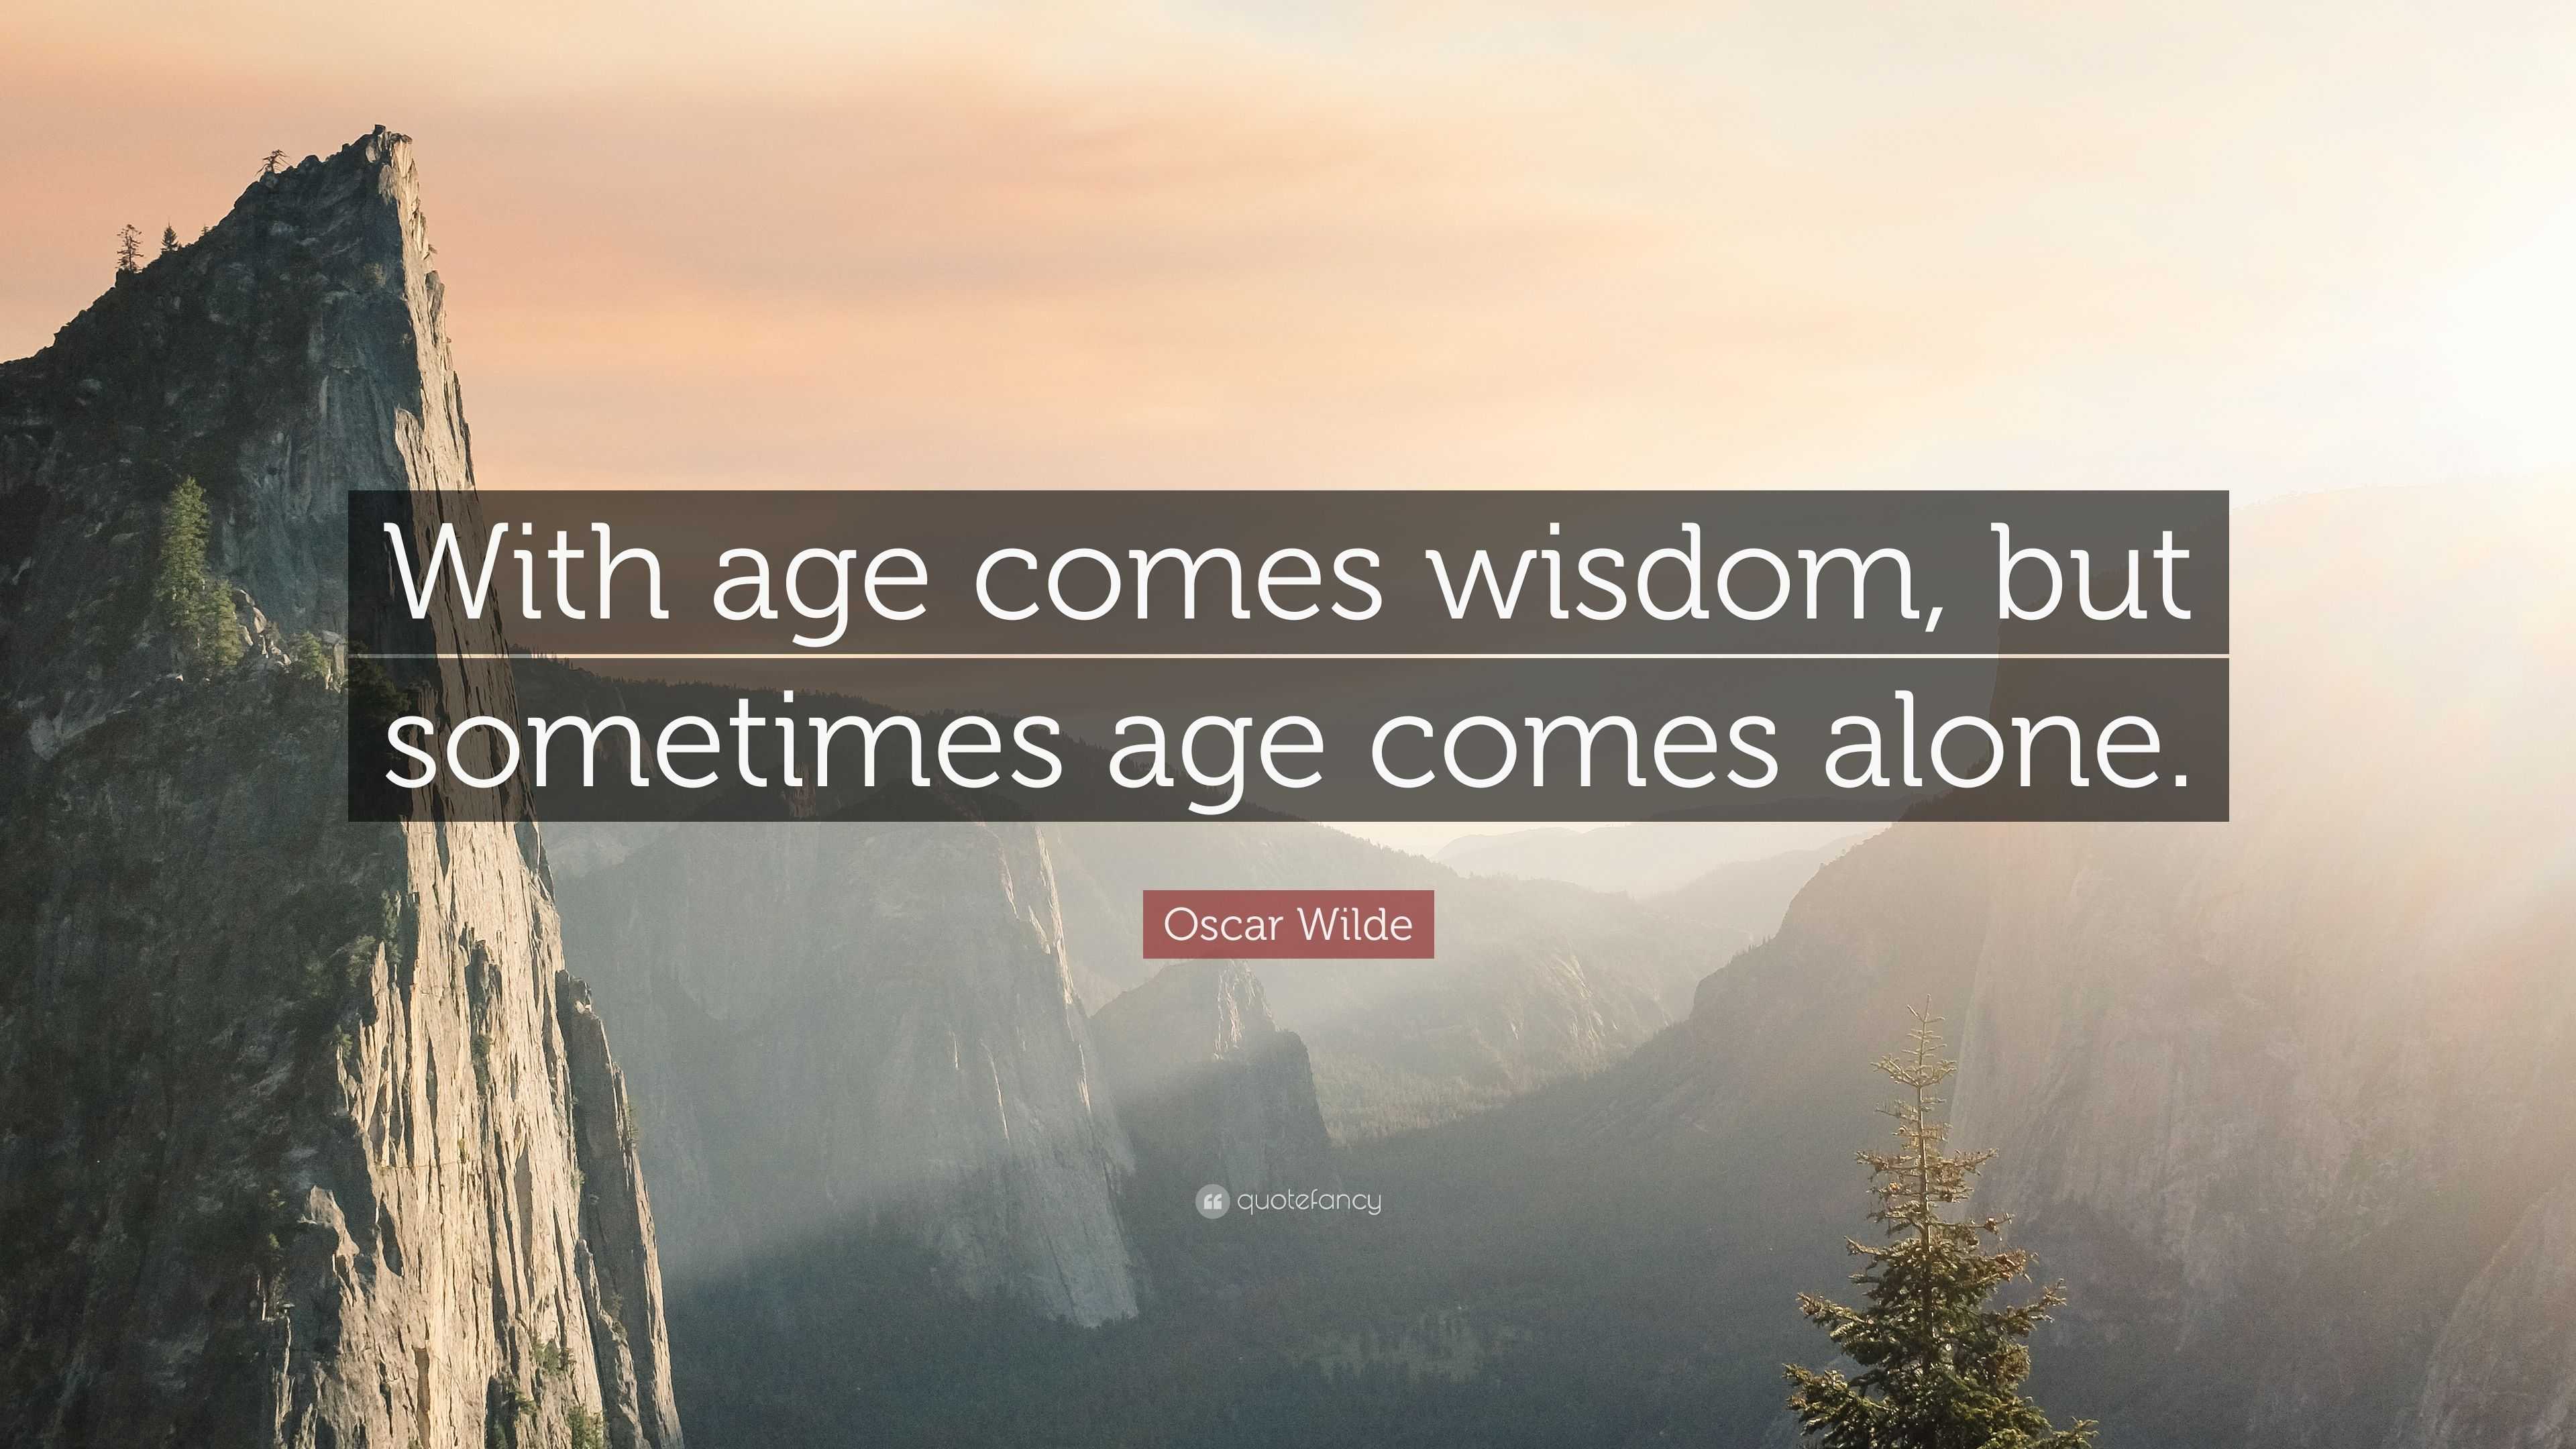 Oscar Wilde Quote “With age comes wisdom, but sometimes